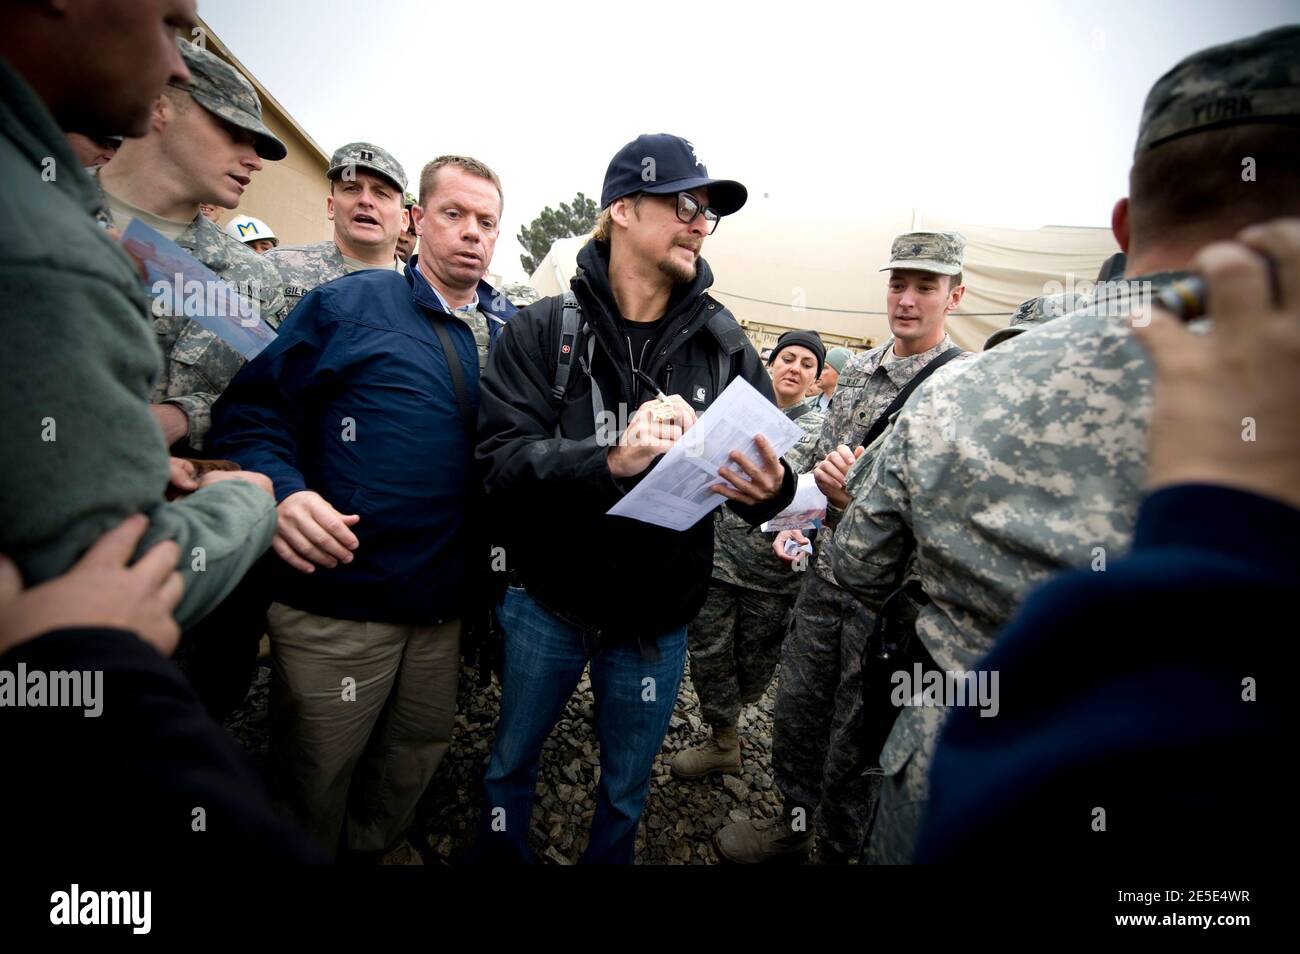 Kid Rock signs autographs after performing at Bagram Air Base in Kandahar, Afghanistan on December 17, 2008, during the 2008 USO Holiday Tour. Photo by Chad J. McNeeley/DOD/ABACAPRESS.COM Stock Photo